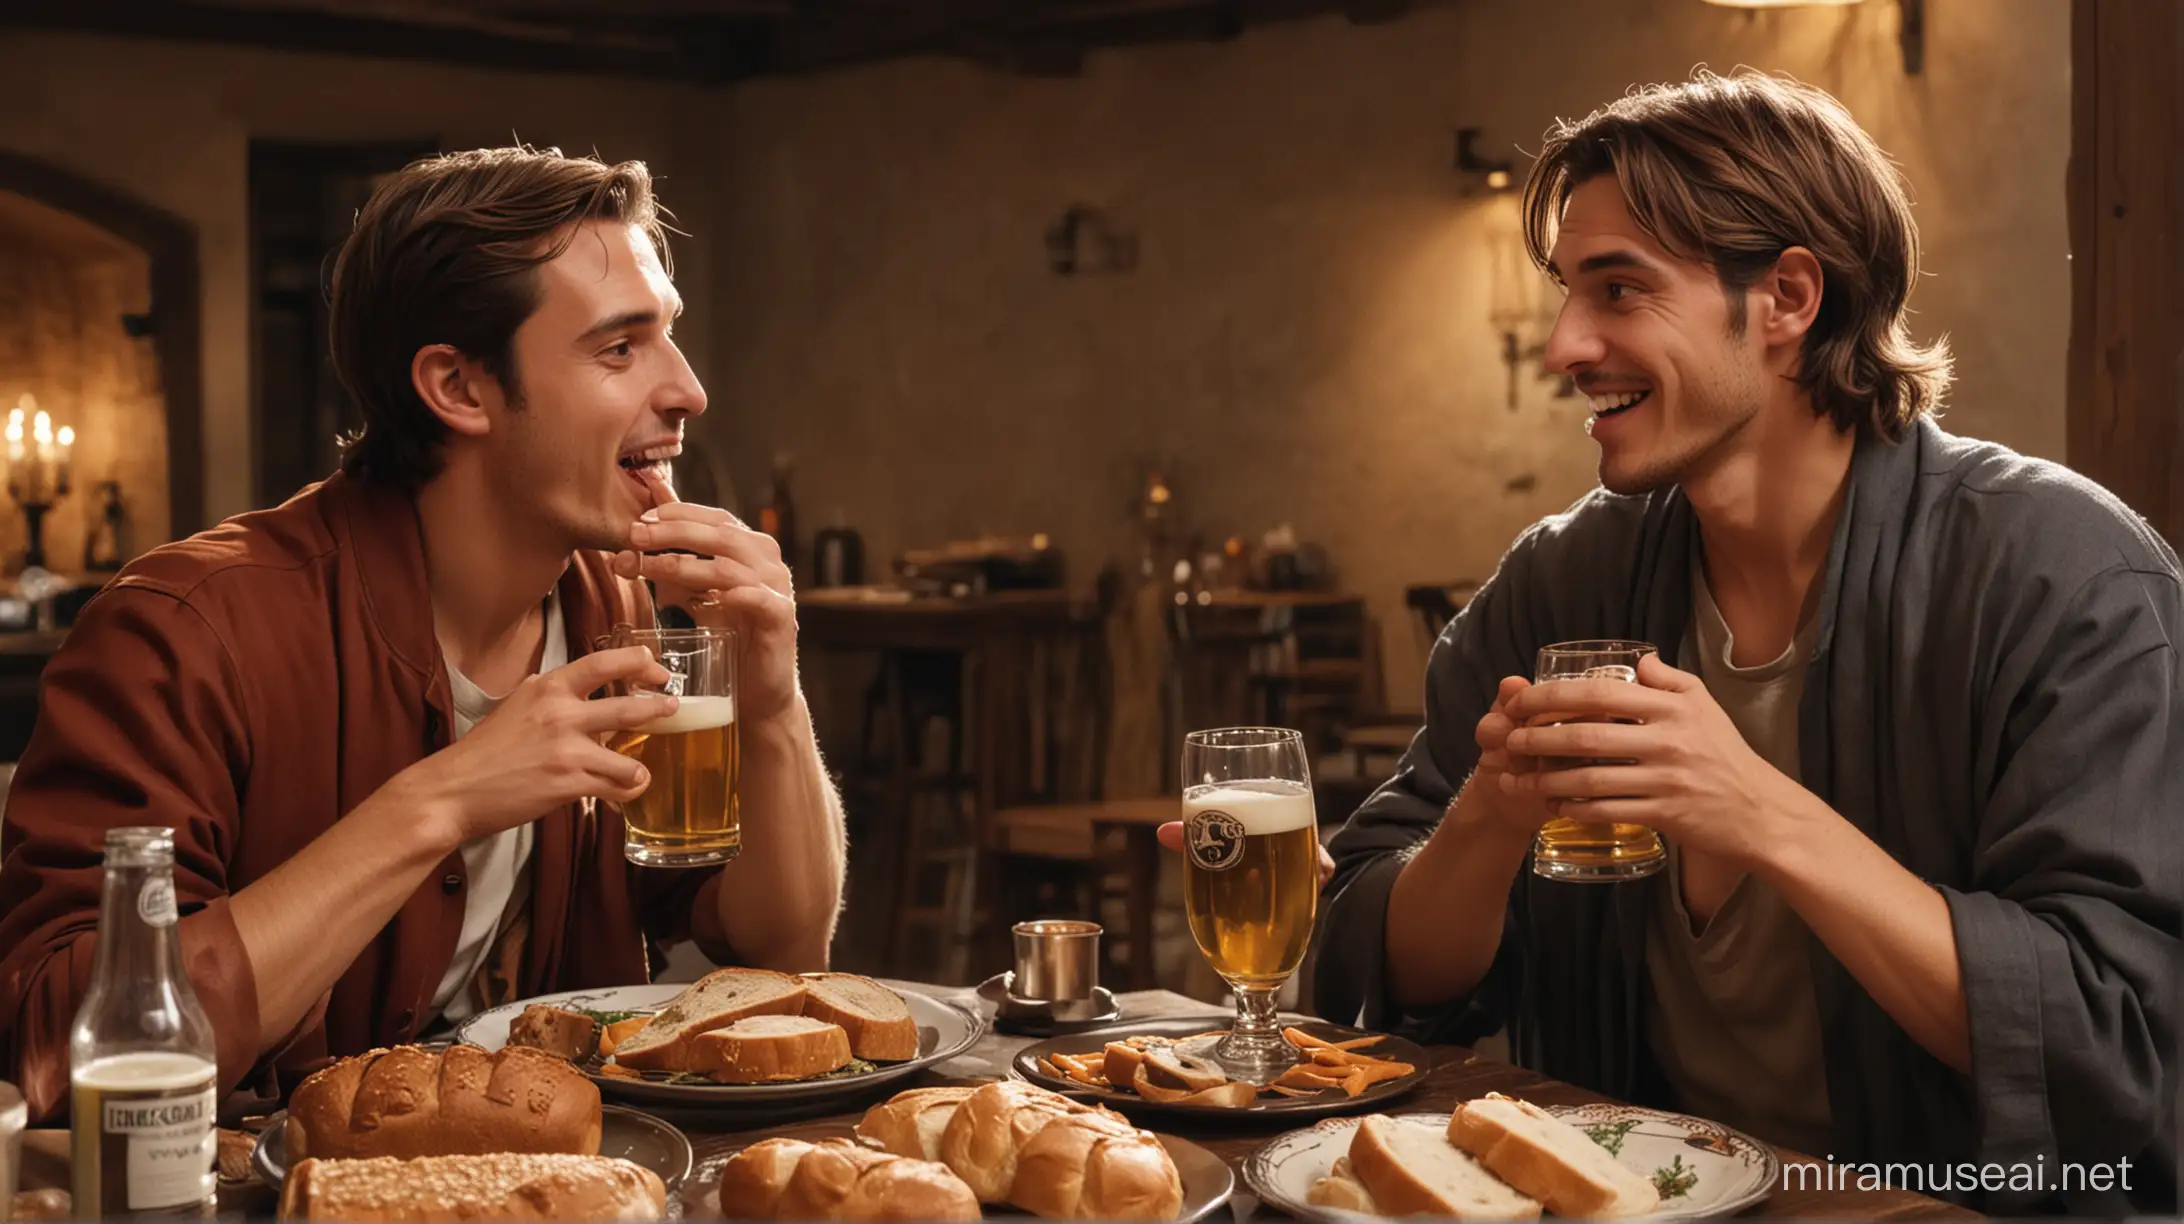  Hermes and Lugus dining, drinking beer and eating bread
 together 